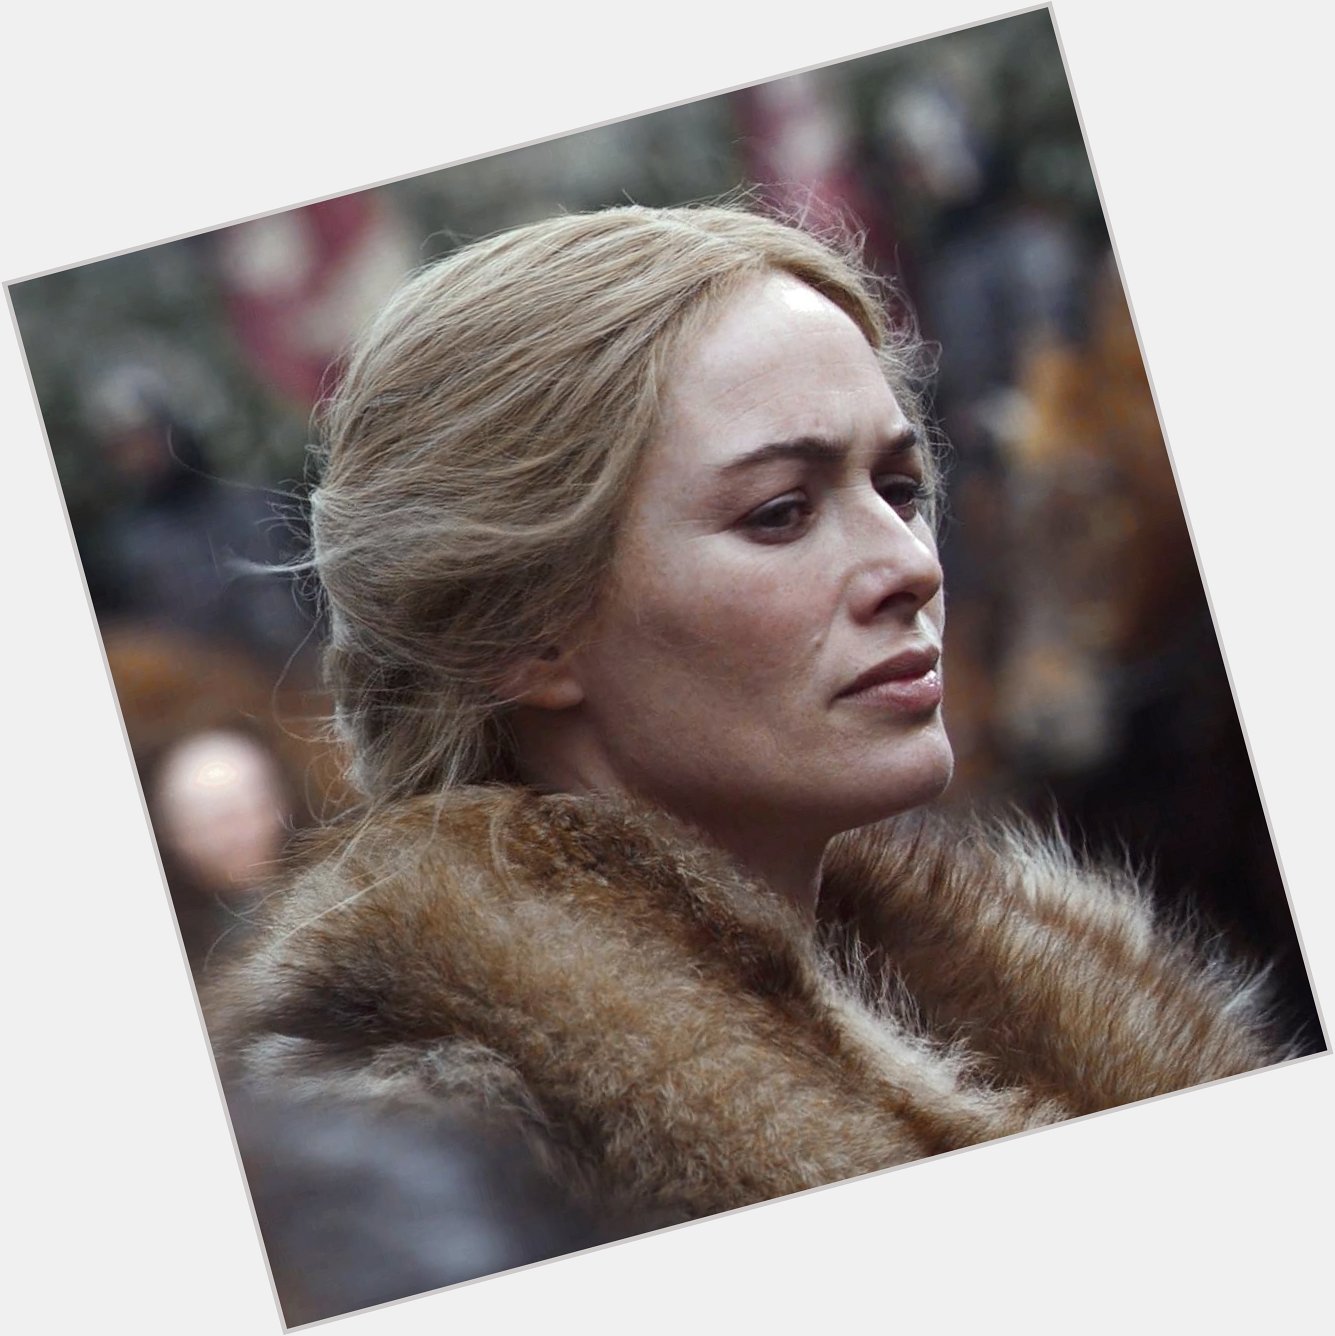 Happy 49th birthday to lena headey, the best cersei we could ever have 